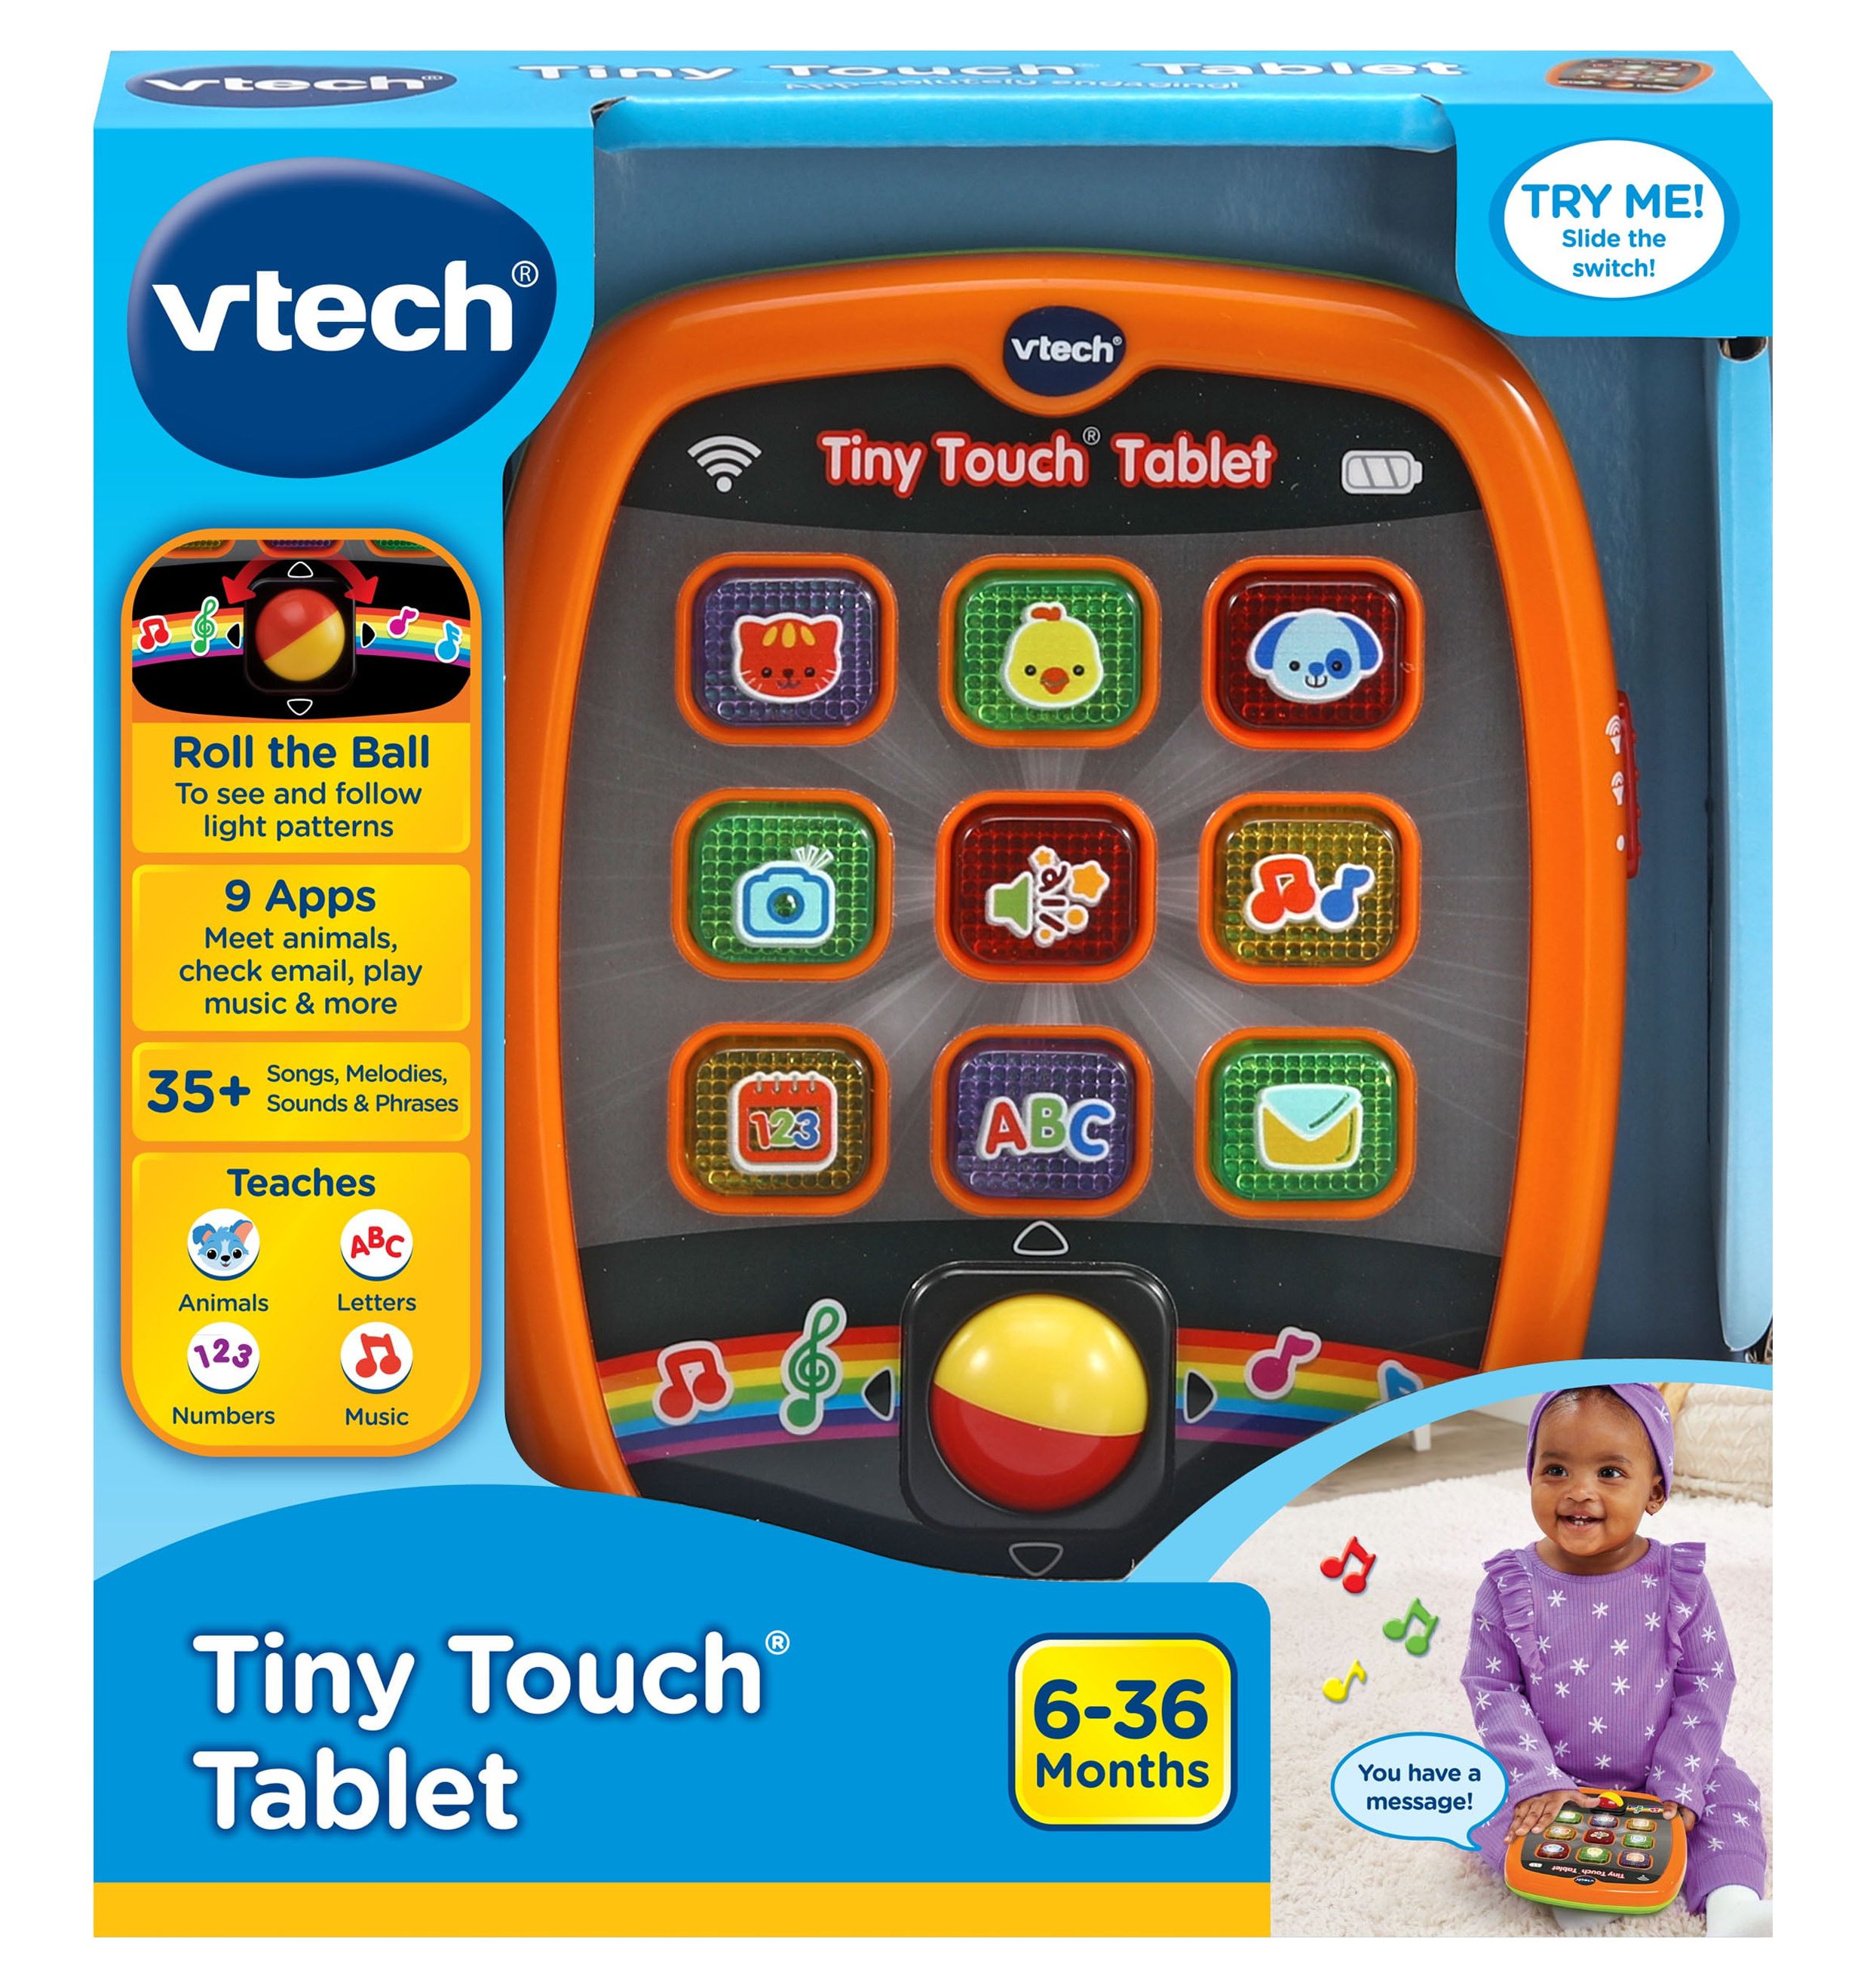 VTech Tiny Touch Tablet, Learning Toy for Baby, Teaches Letters, Numbers, Walmart Exclusive - image 4 of 5